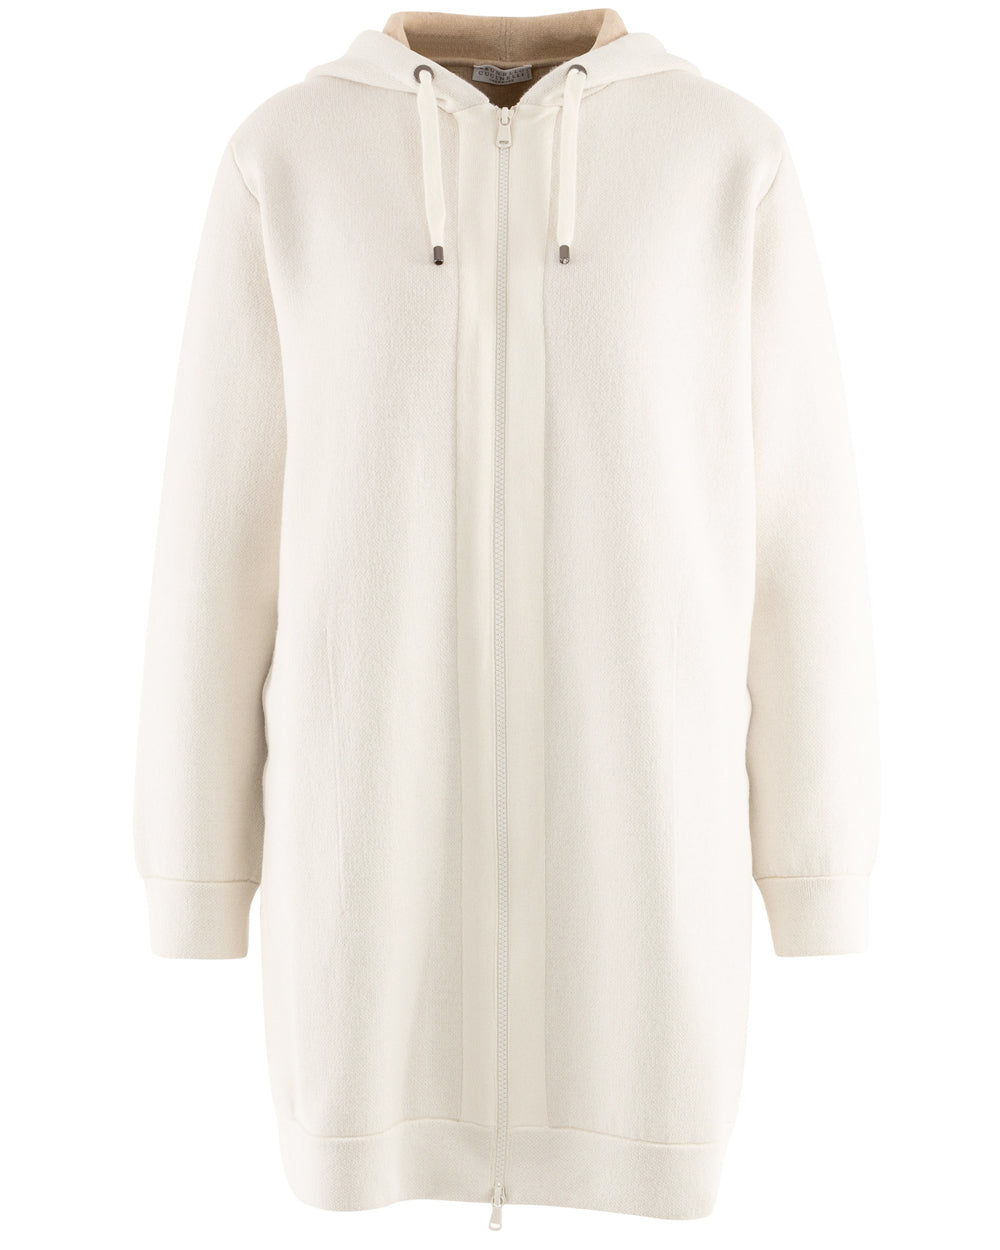 White Double Face Cashmere Zip Up Hooded Cardigan